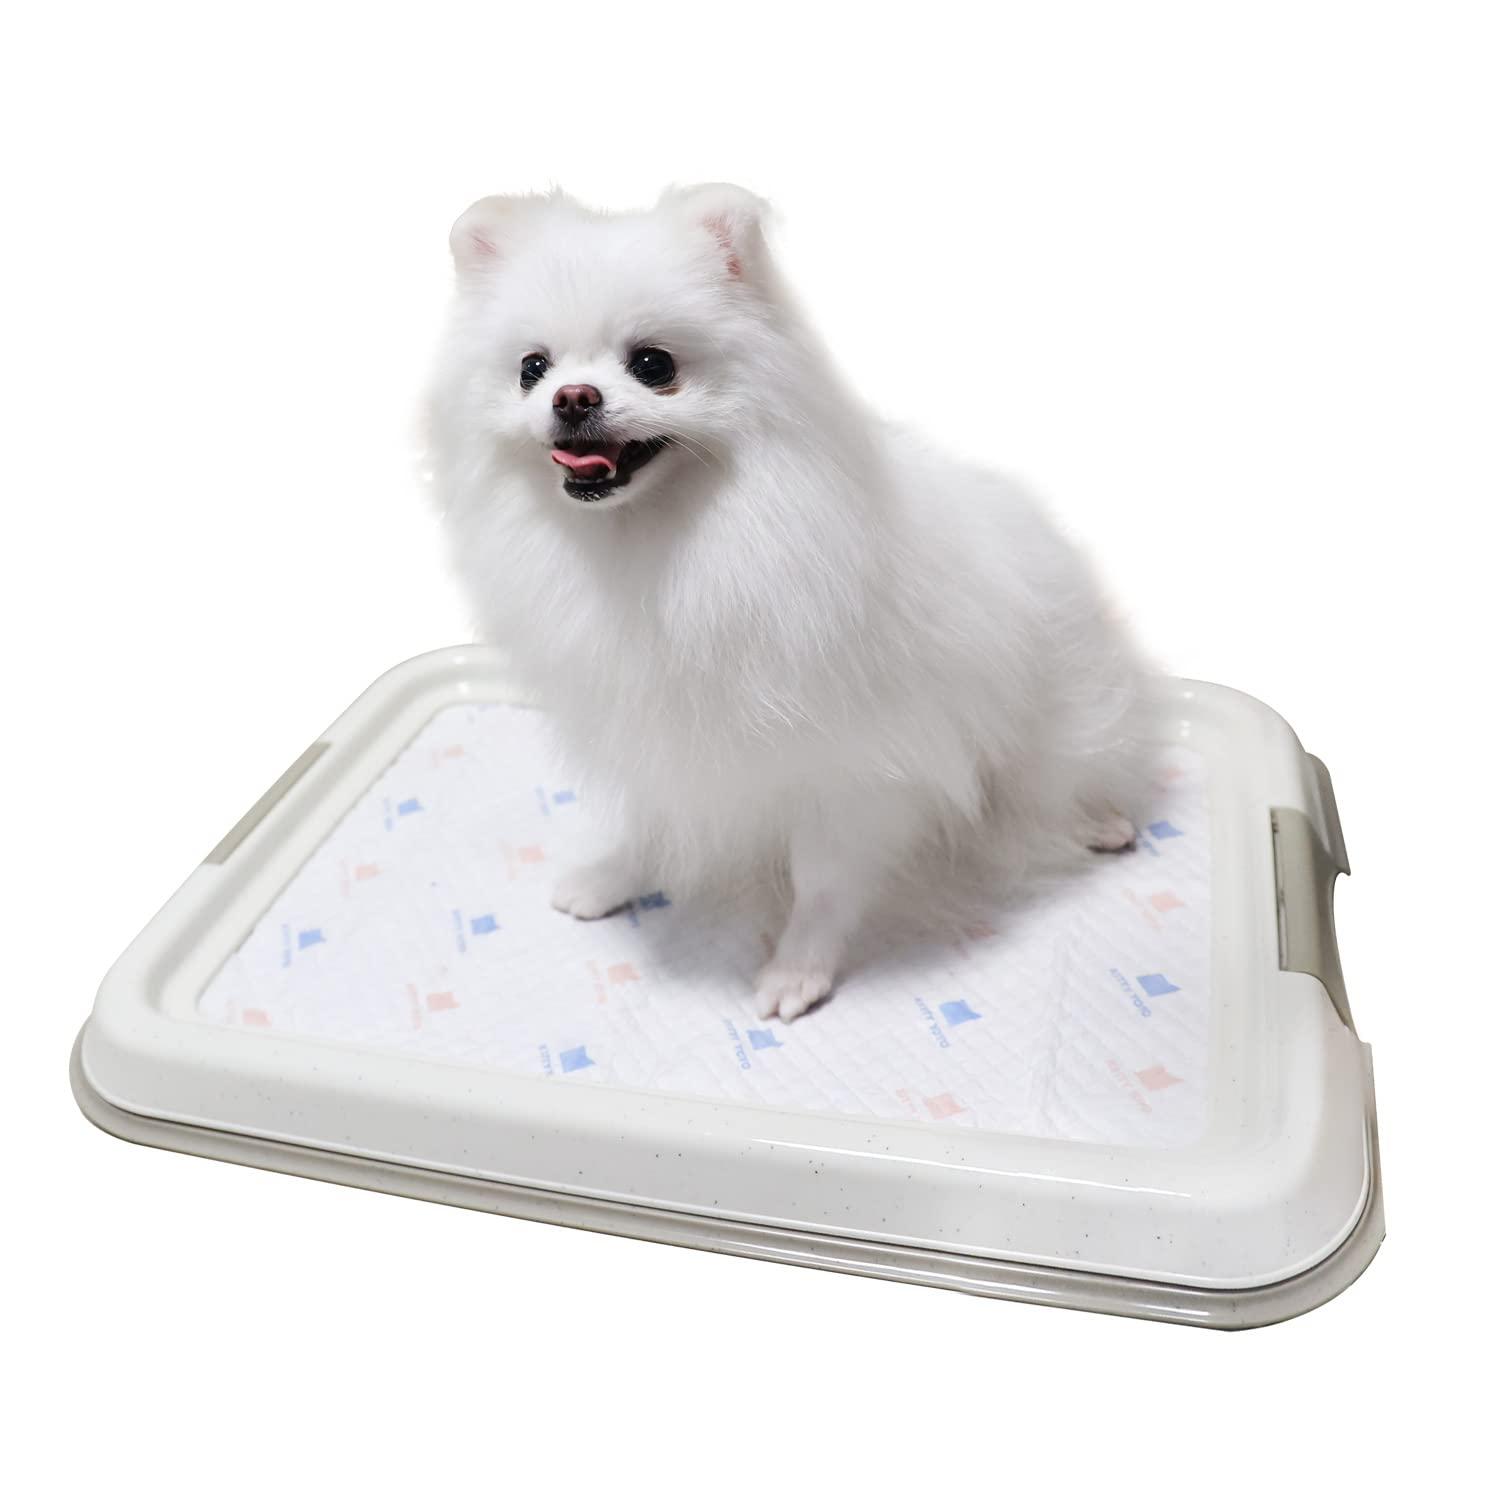 PAWISE Pee Pad Holder for Puppy Pads, Dog Pad Holder, Pee Pad Tray for Training Pads,Puppy Pad Holder (19.2\\\